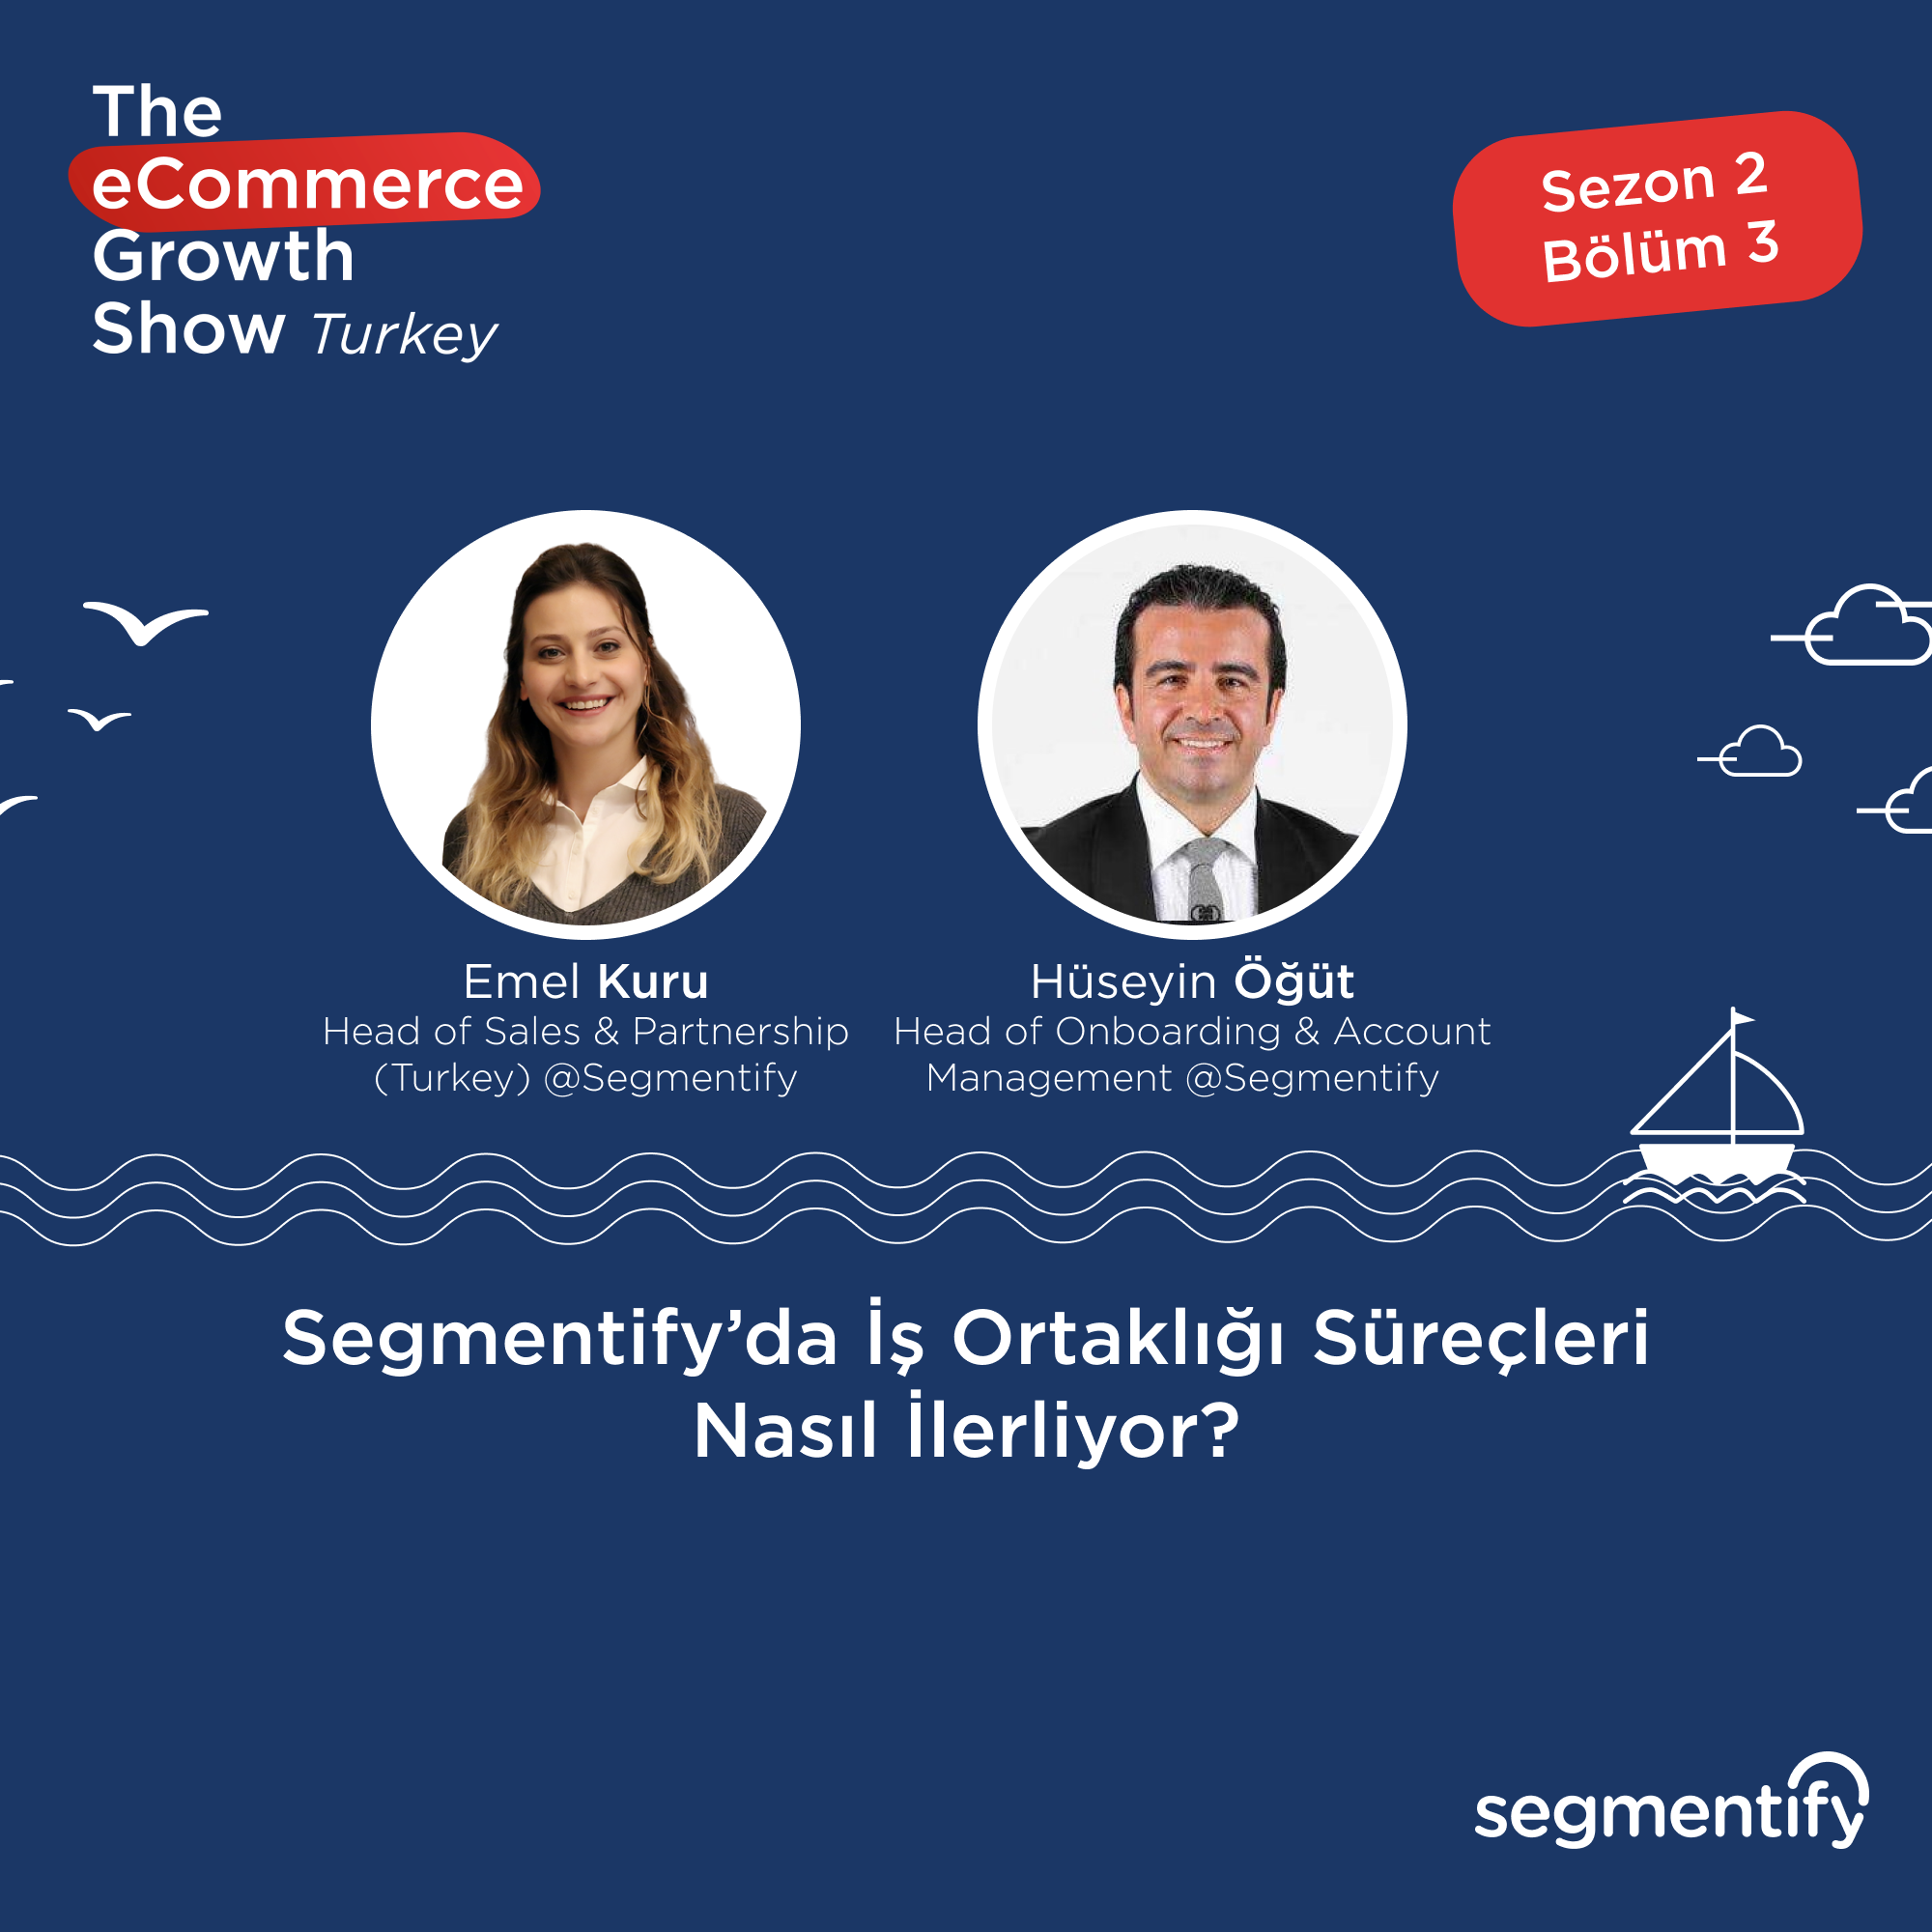 Artwork for podcast The eCommerce Growth Show Turkey